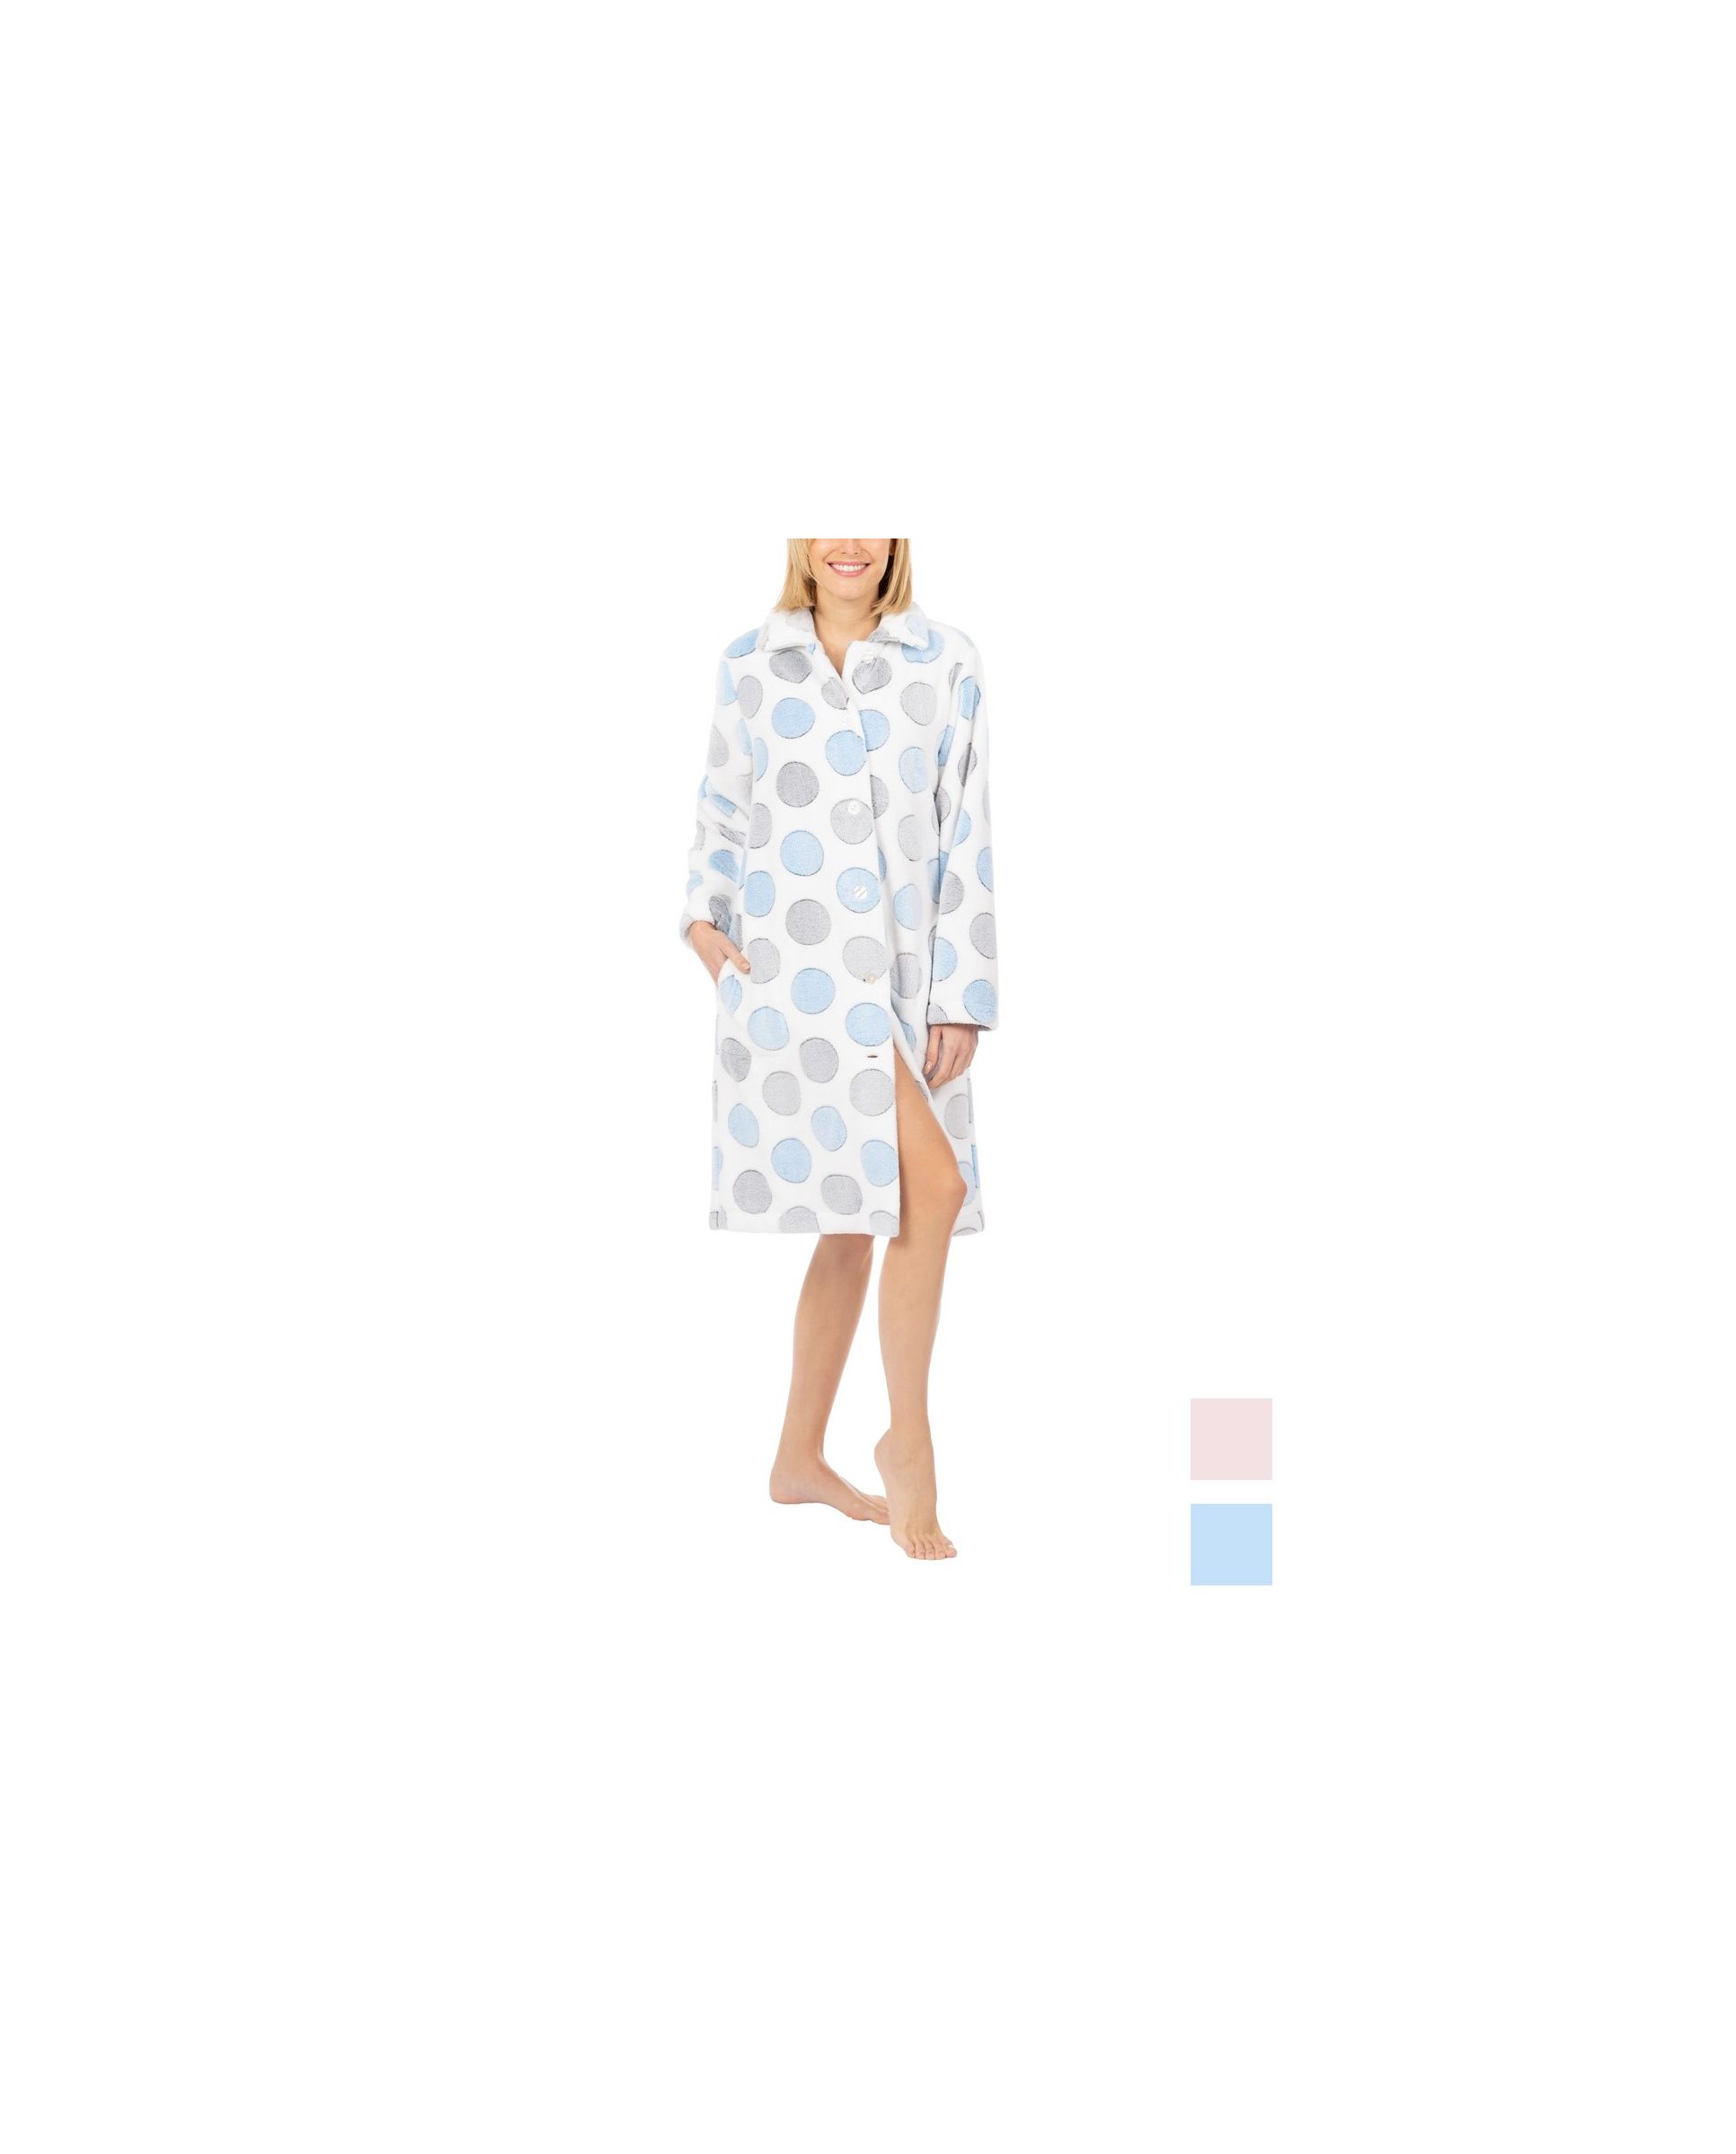 Women's long buttoned winter dressing gown flannel circles sky blue